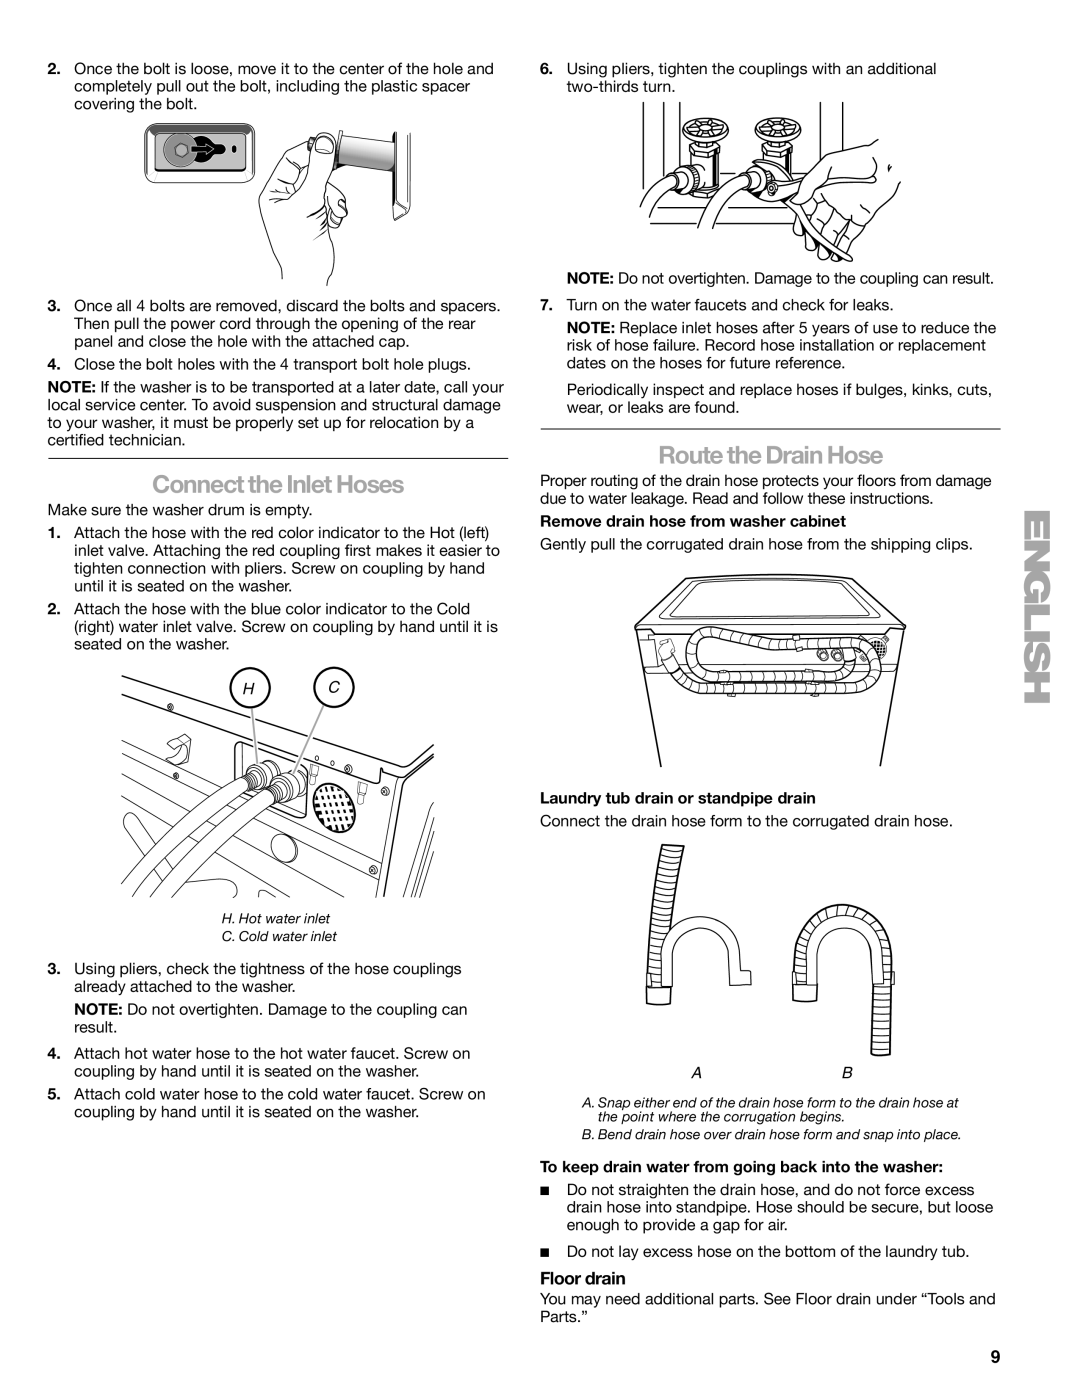 Sears 110.4778*, 110.4779* manual Connect the Inlet Hoses, Route the Drain Hose, Floor drain 